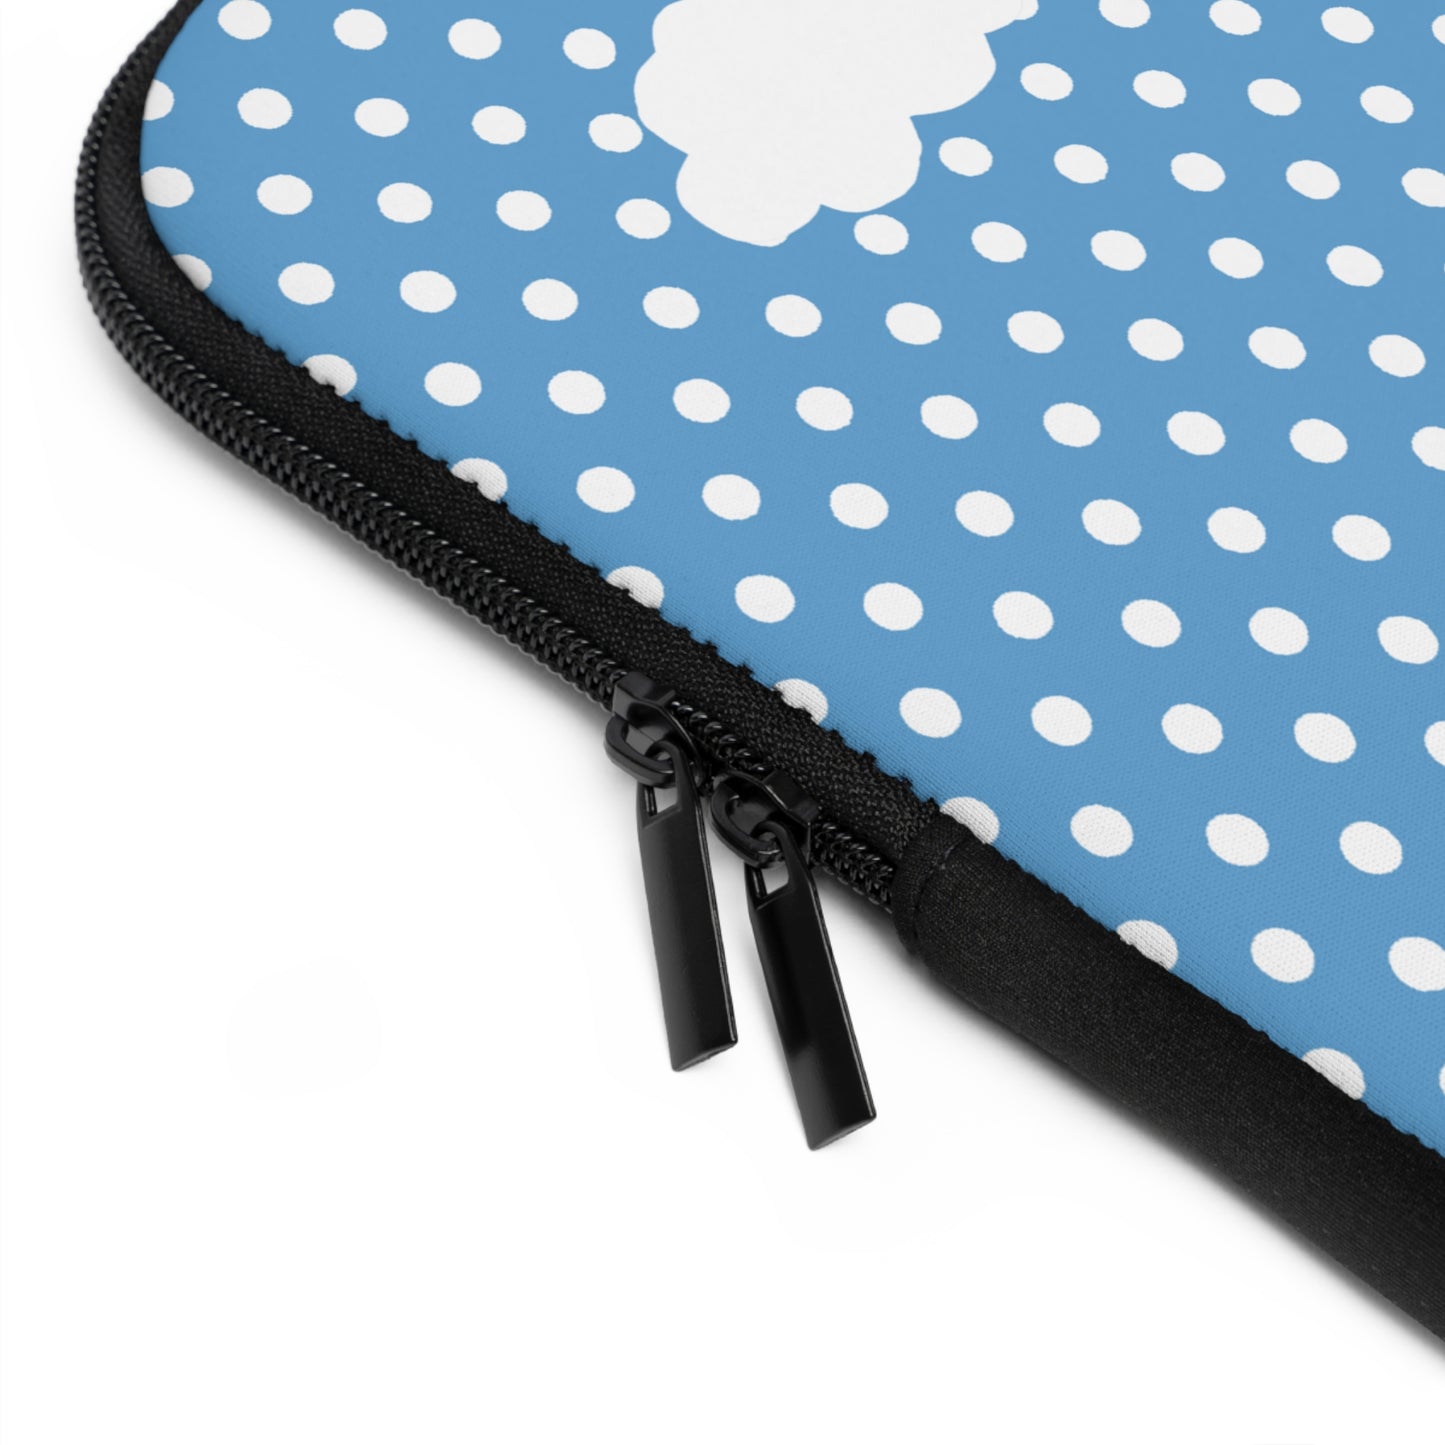 Professional Day Dreamer Laptop Sleeve in Blue